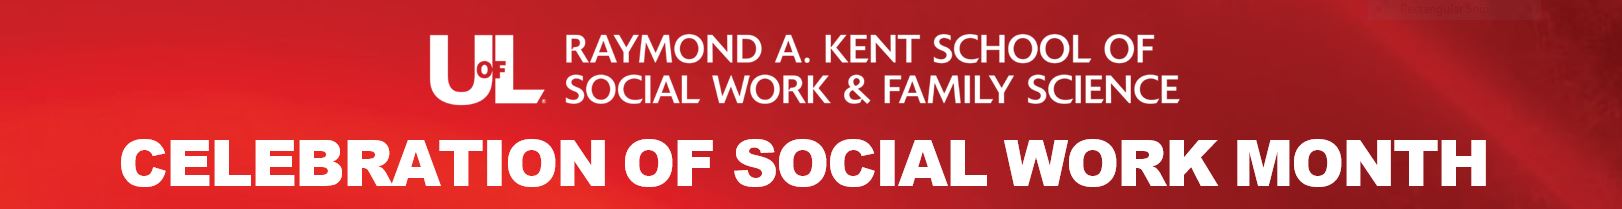 IMAGE FOR THE SOCIAL WORK MONTH EVENTS